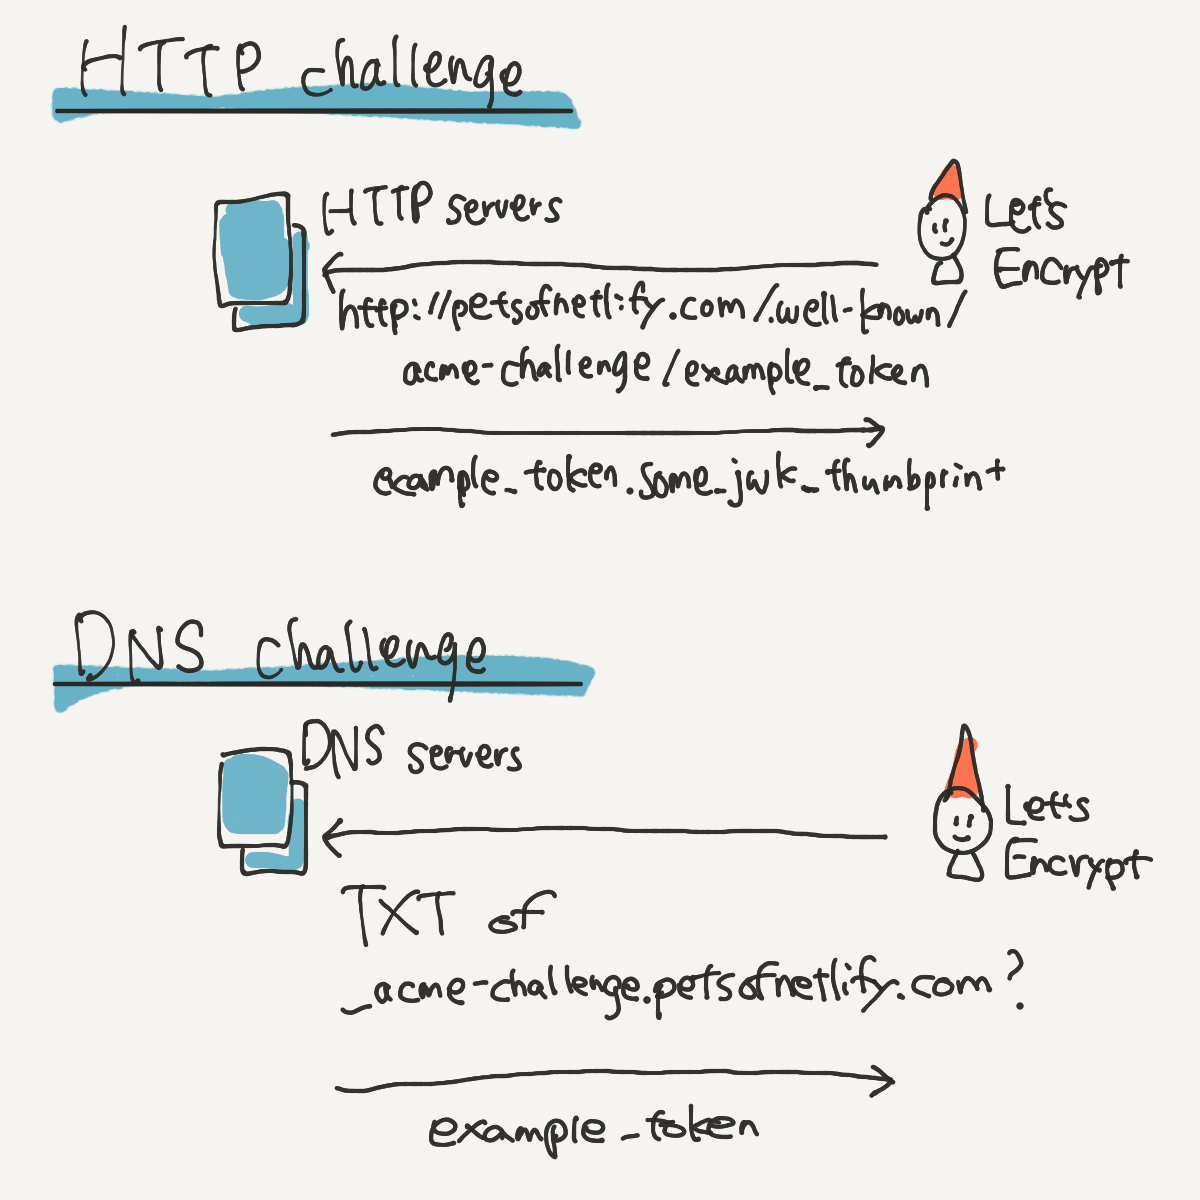 HTTP challenge and DNS challenge